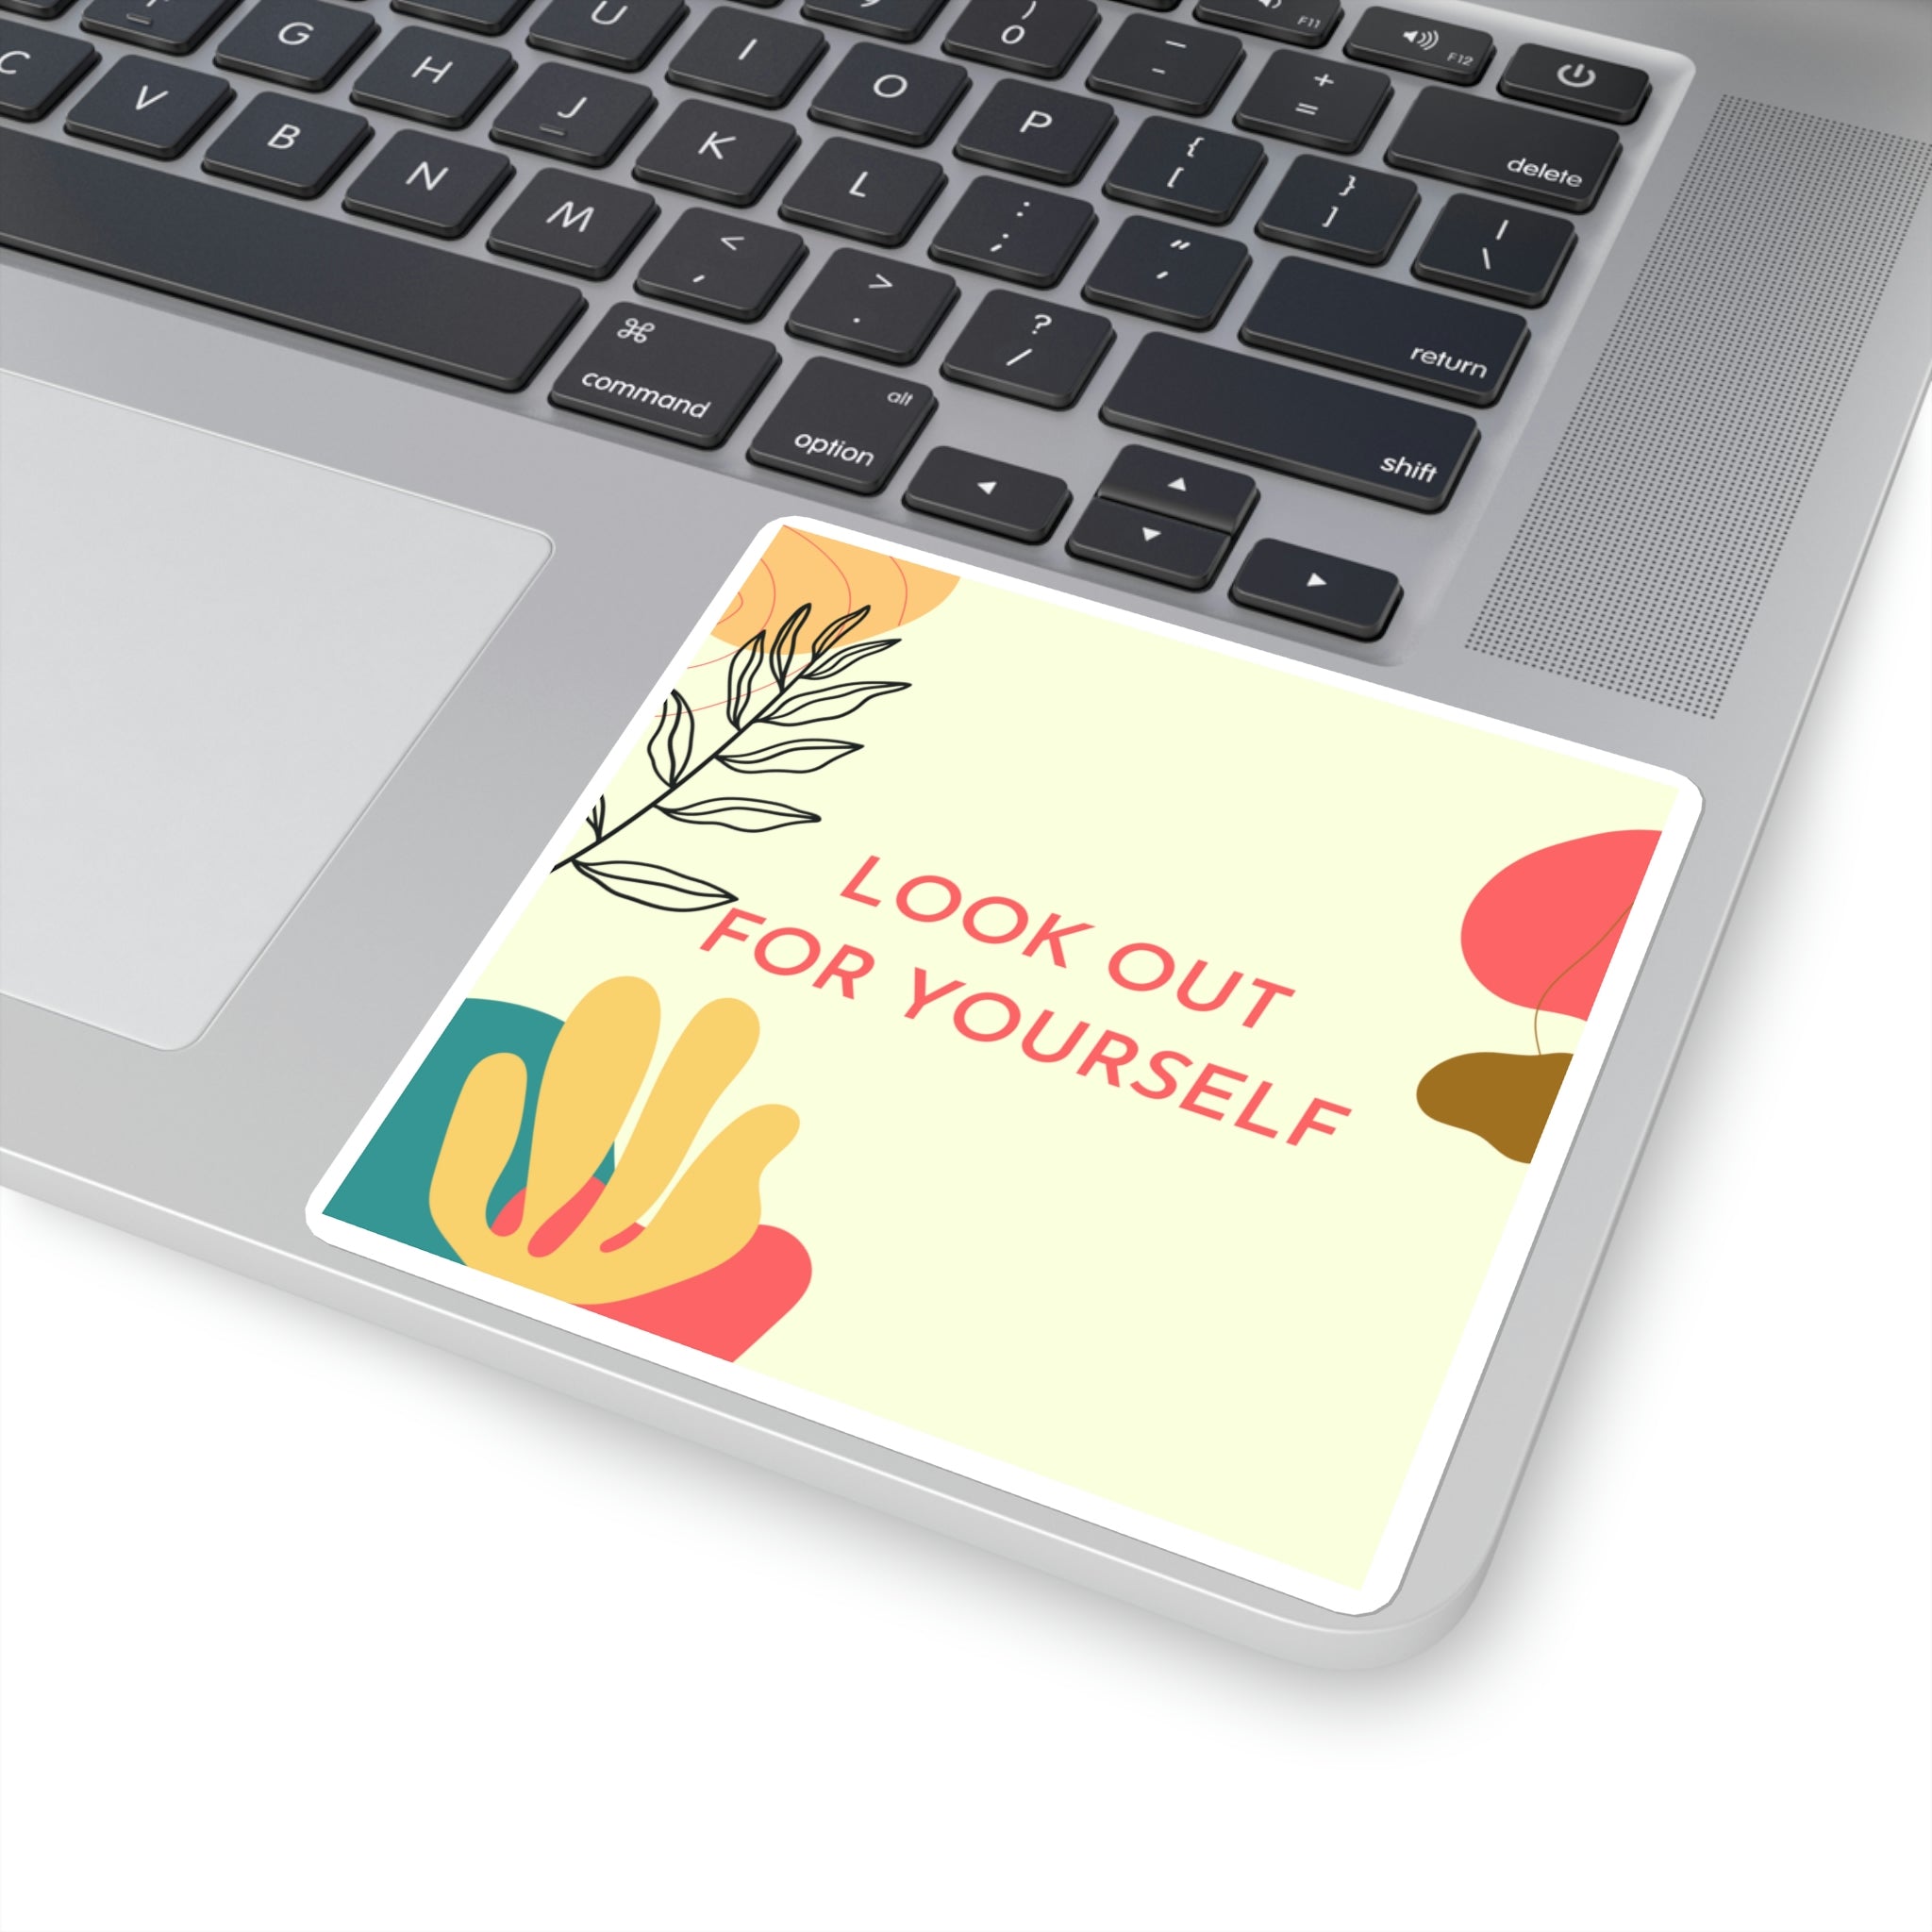 "Look out for Youself” Sticker